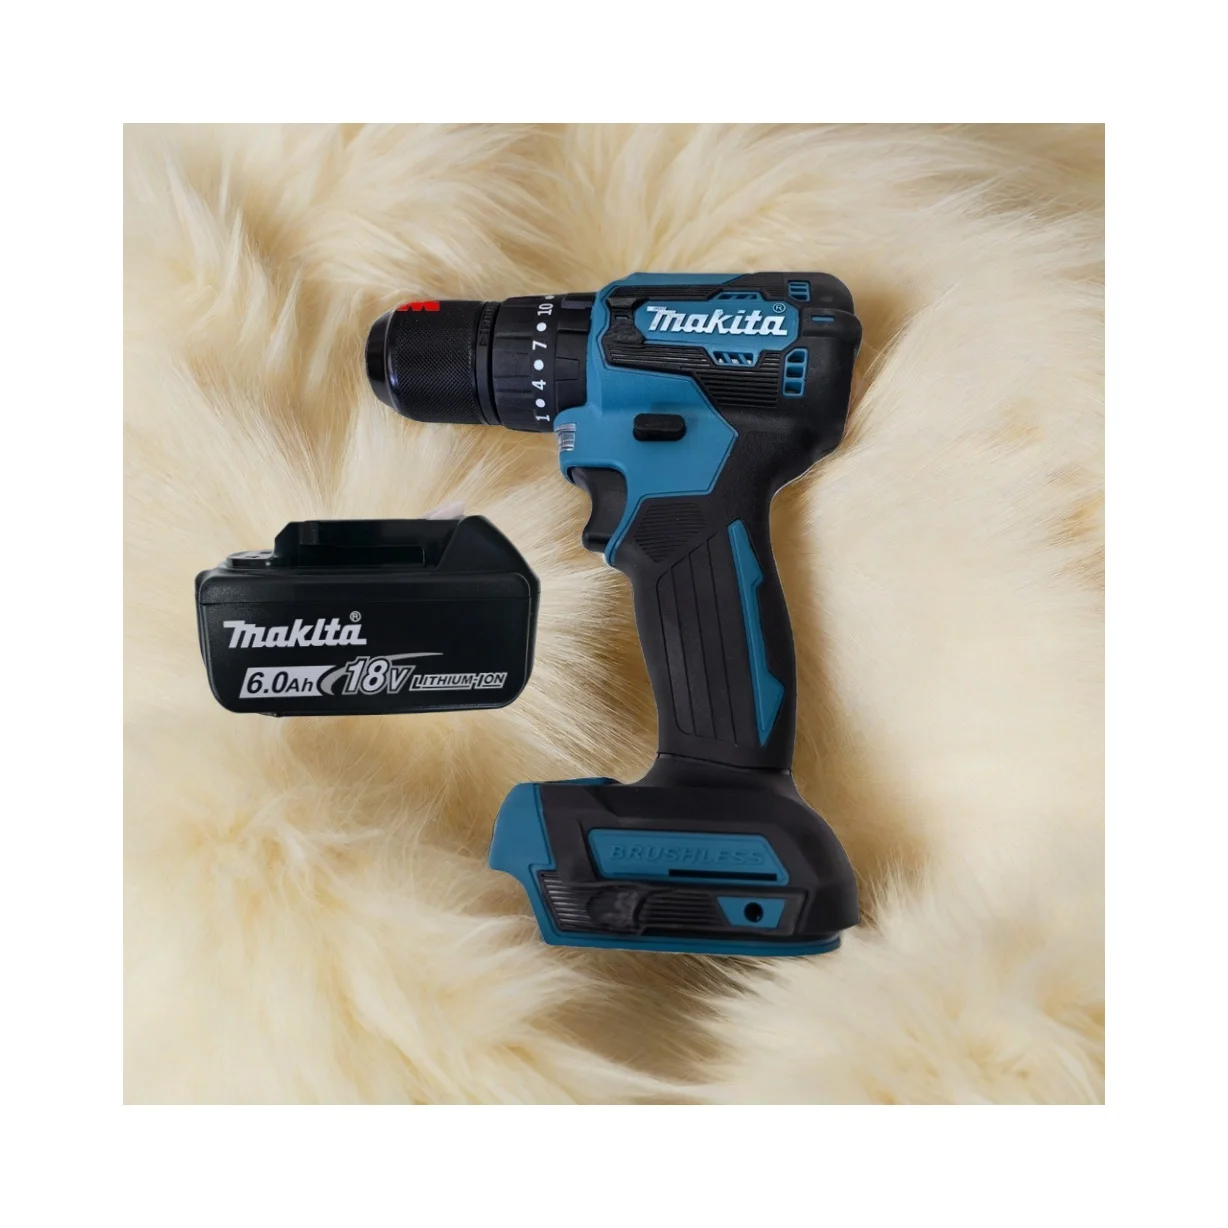 

Makita DHP485 13MM LXT Brushless Driver rechargeable screwdriver impact electric power drill Compact cordless TOOL with battery